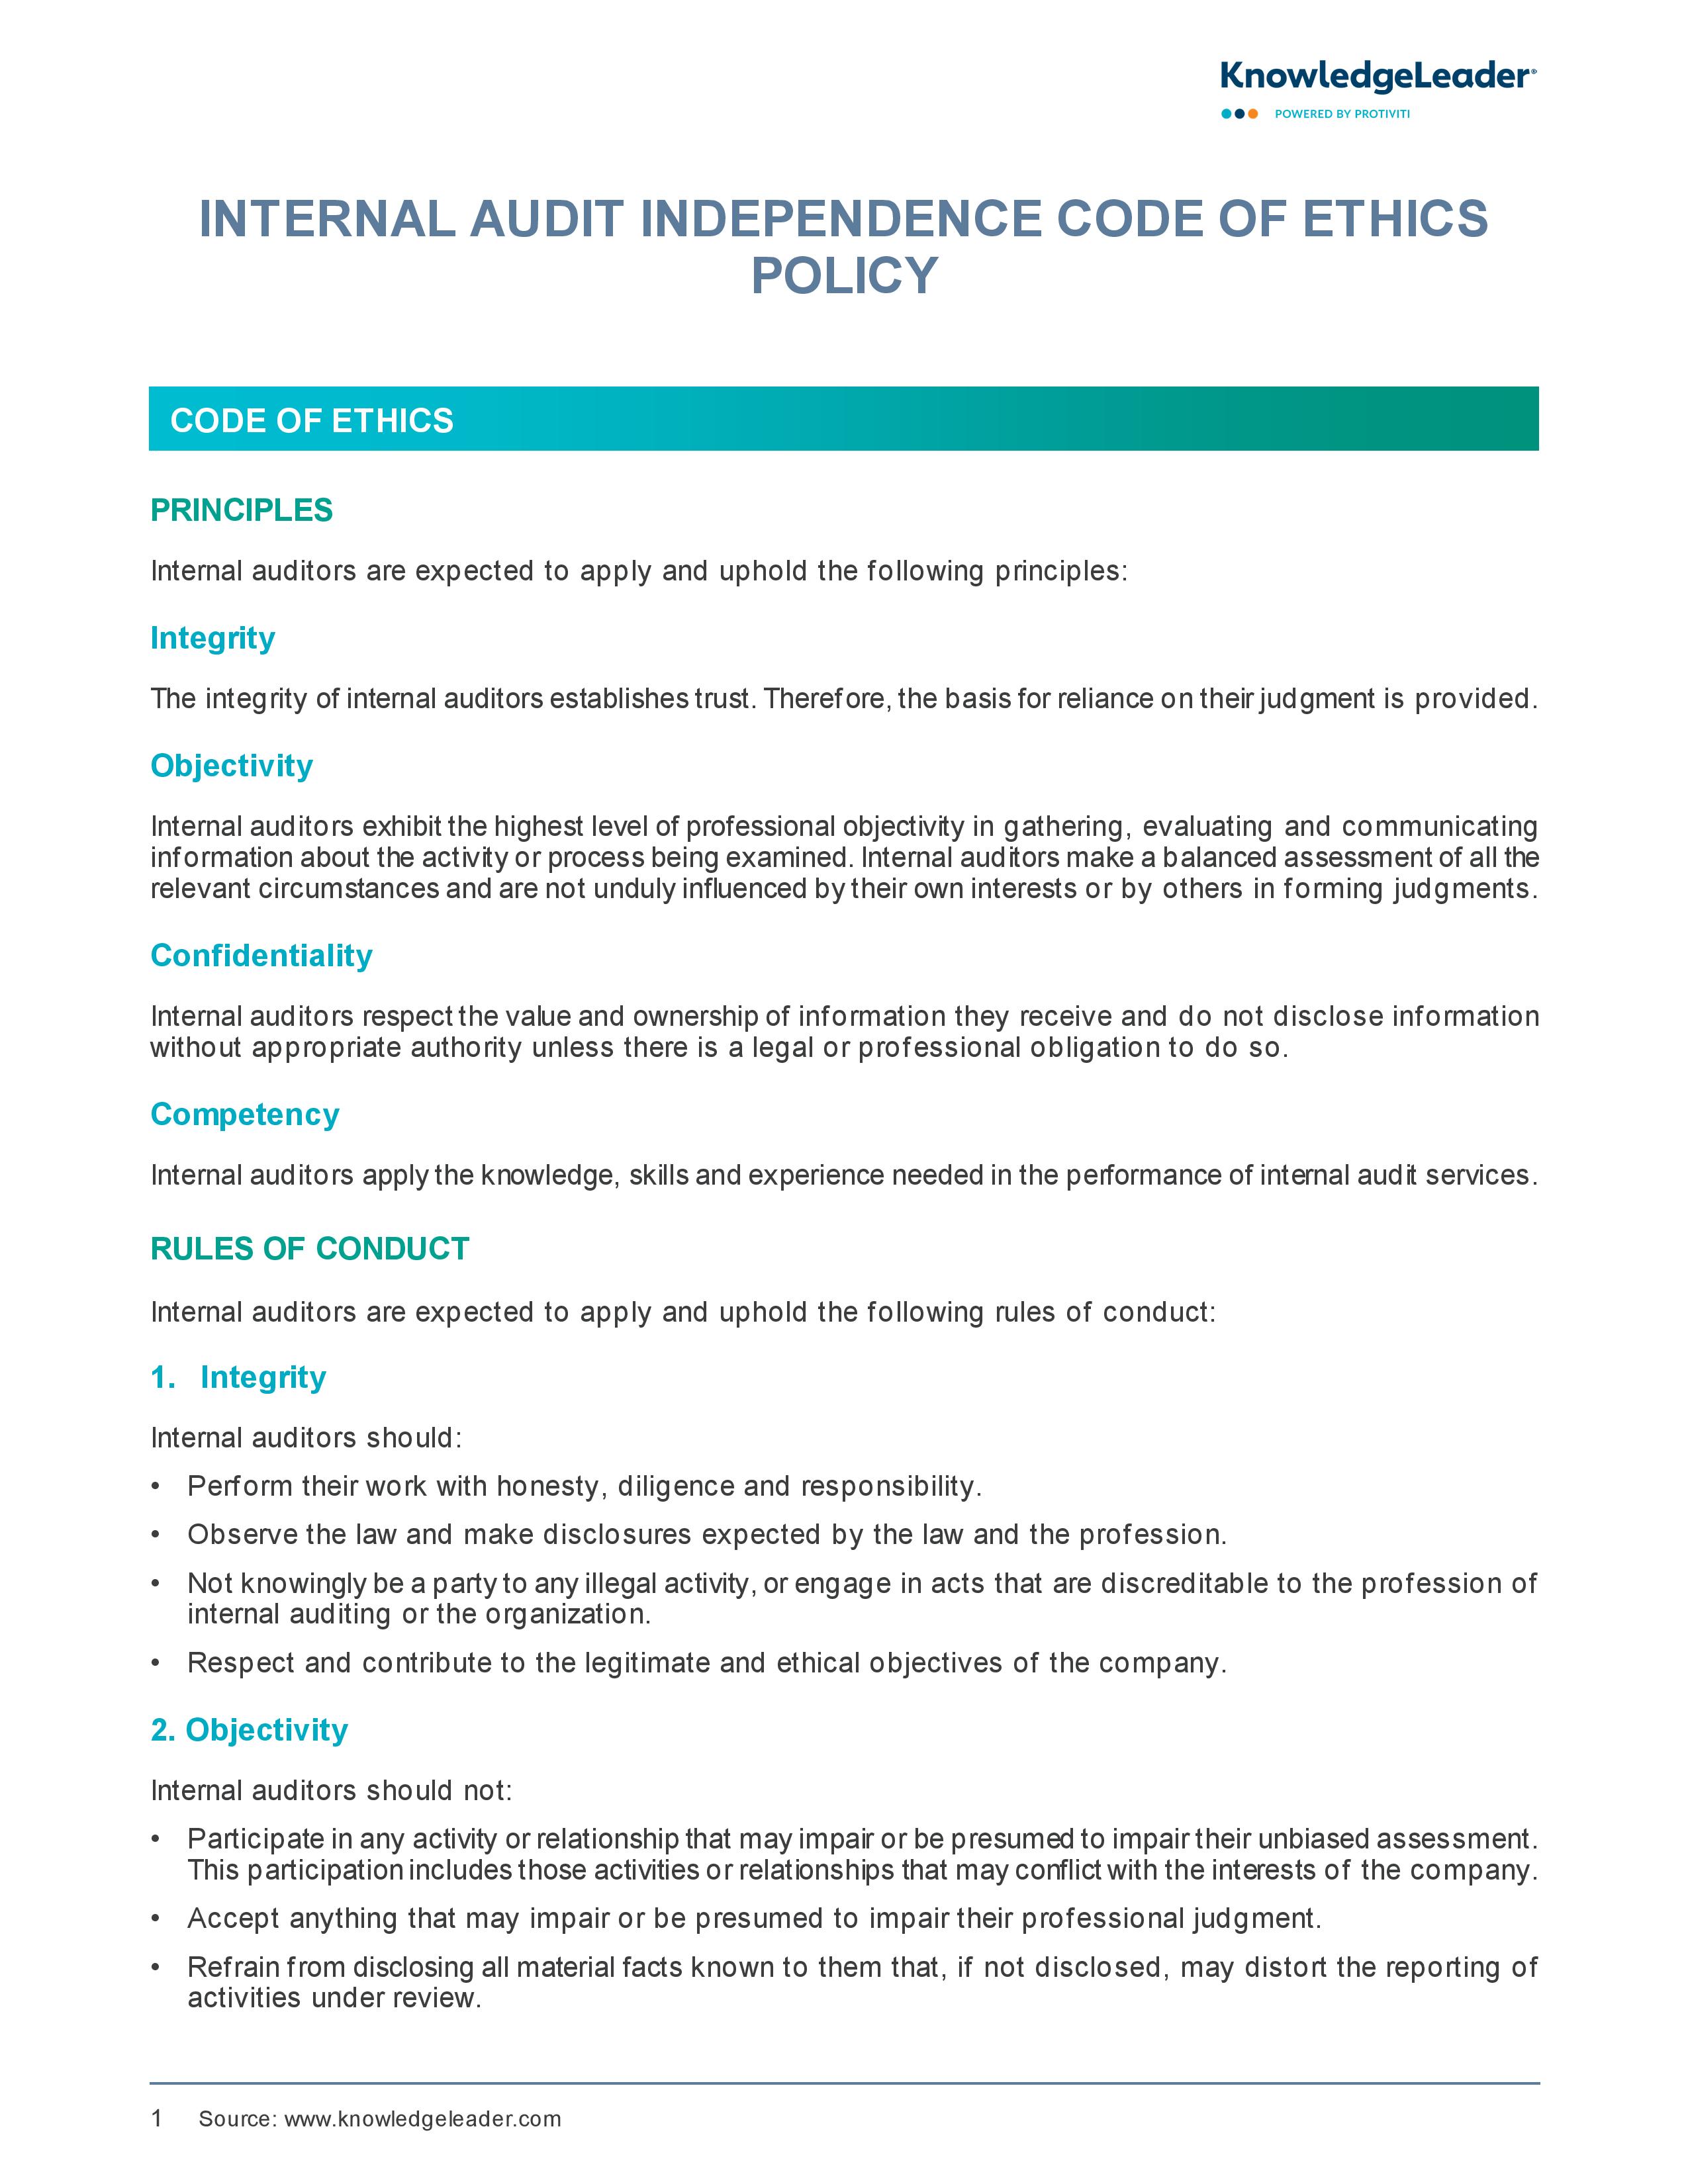 screenshot of the first page of Internal Audit Independence Code of Ethics Policy